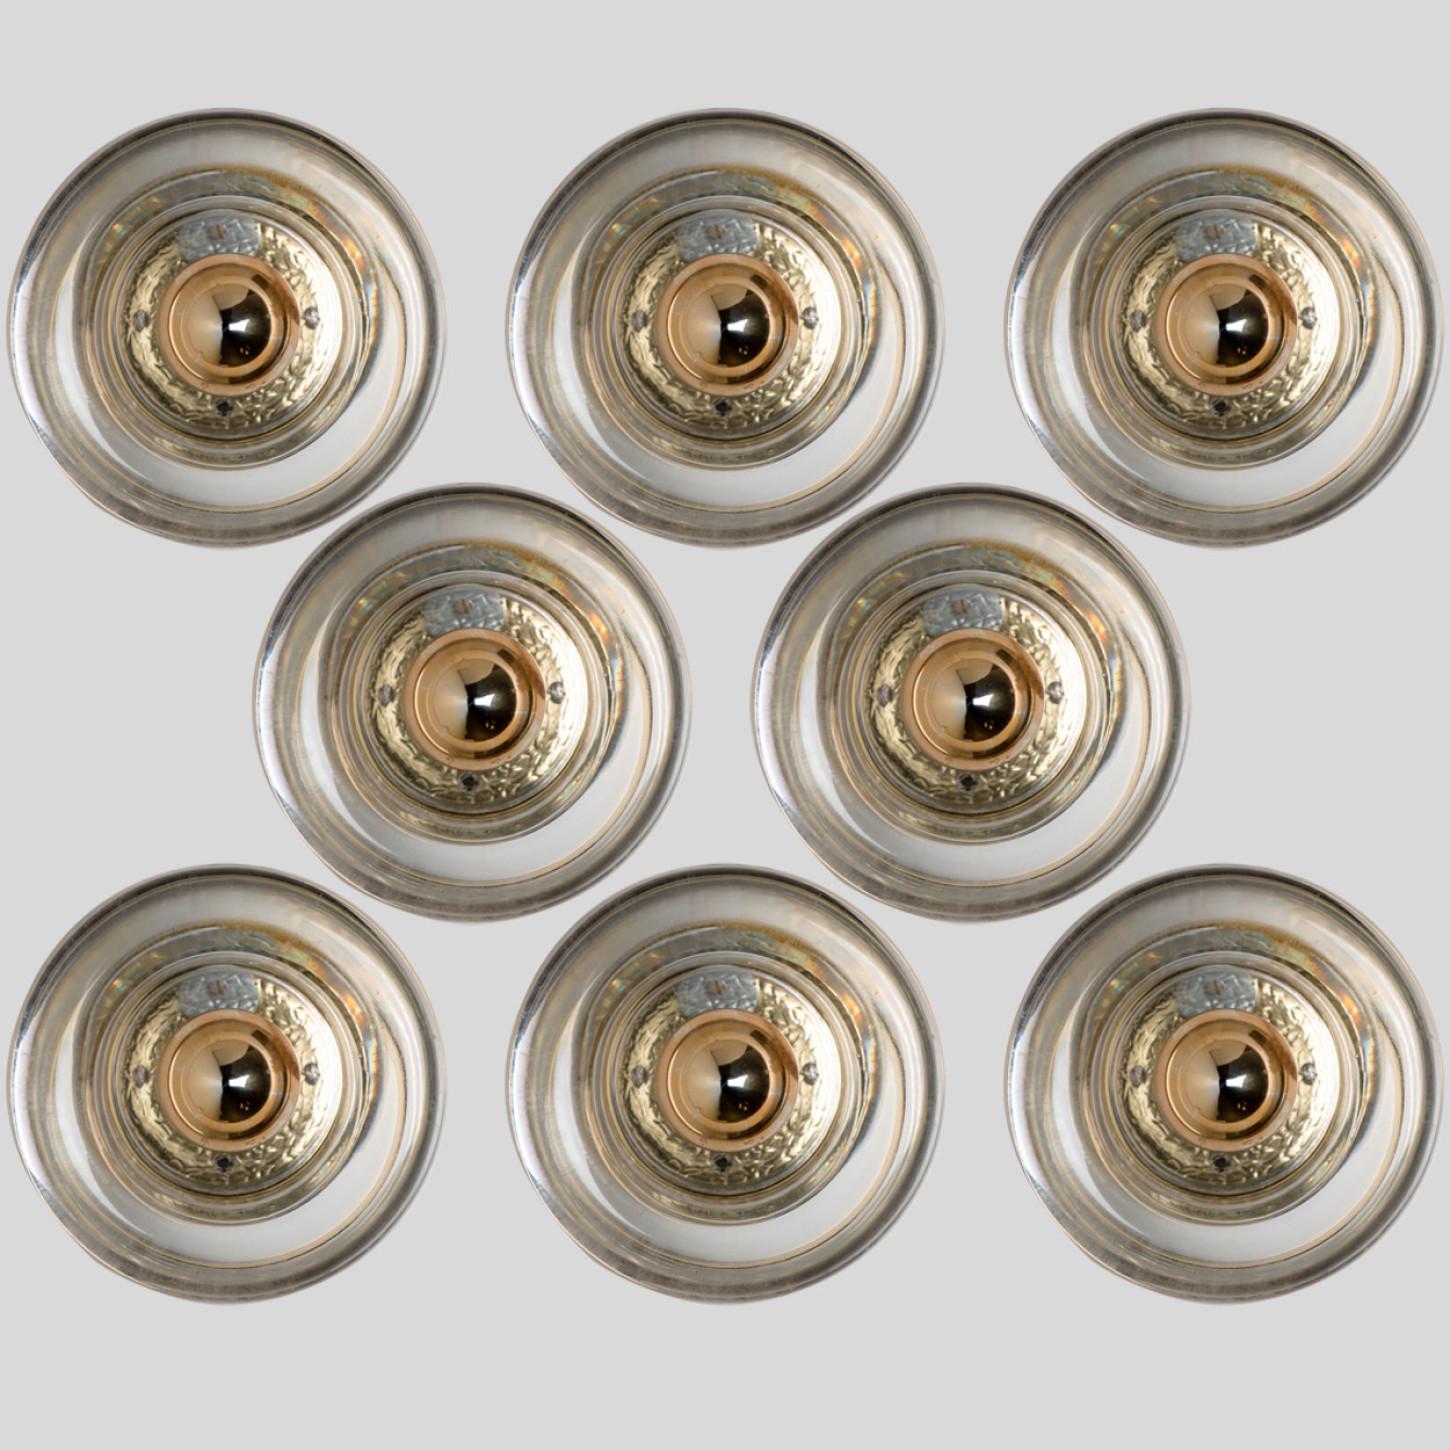 1 of the 8 Glass Brass Wall Sconces/ Flush Mounts by Cosack Leuchten, 1970s For Sale 2